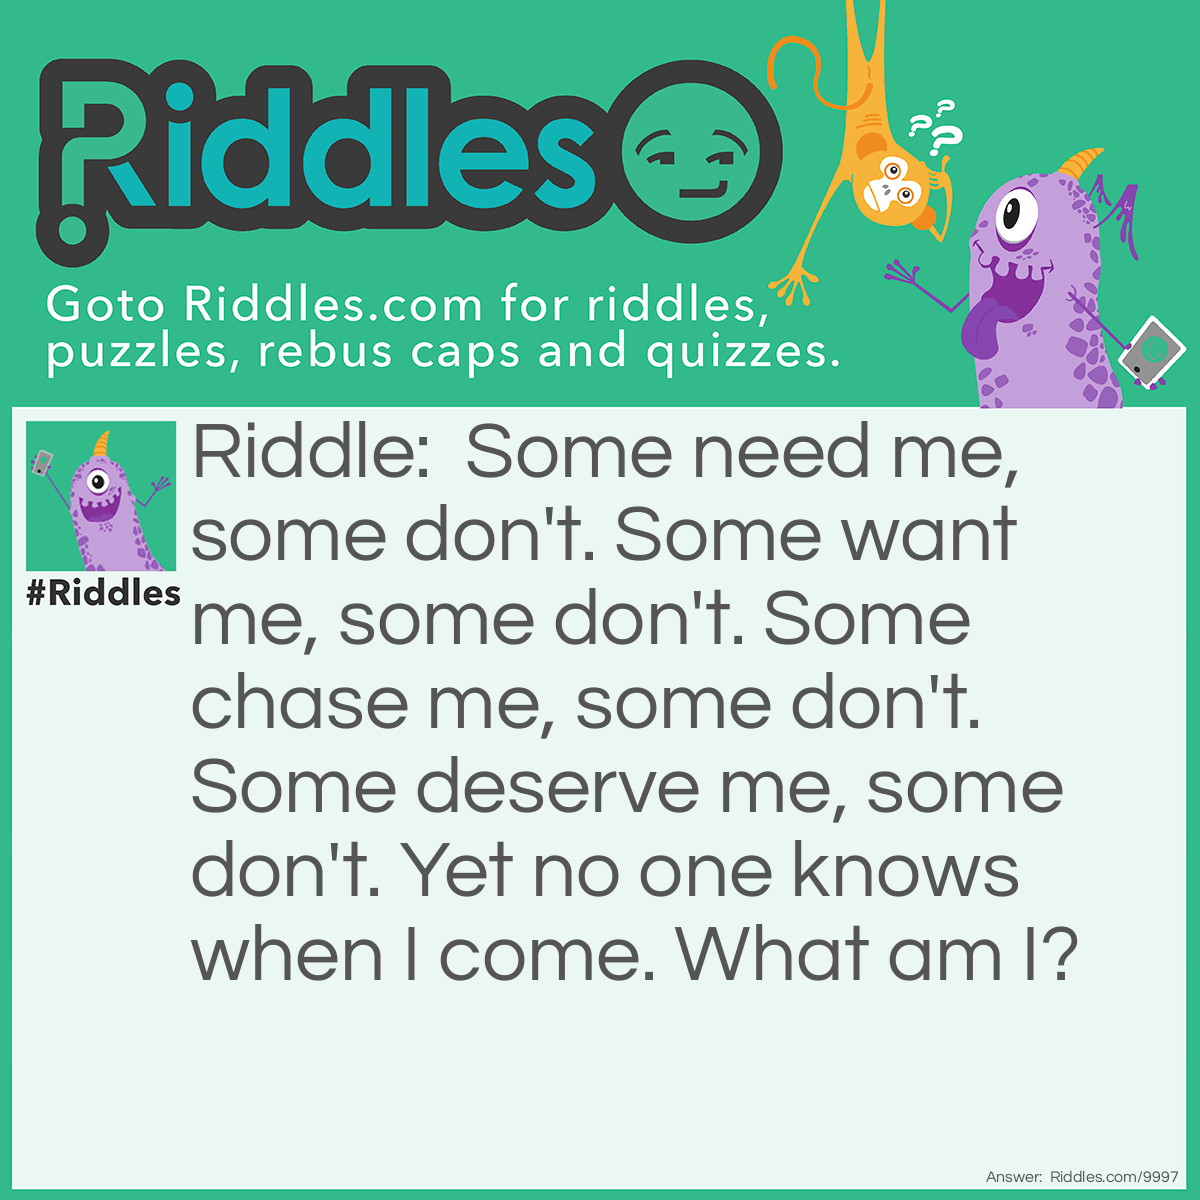 Riddle: Some need me, some don't. Some want me, some don't. Some chase me, some don't. Some deserve me, some don't. Yet no one knows when I come. What am I? Answer: Love.